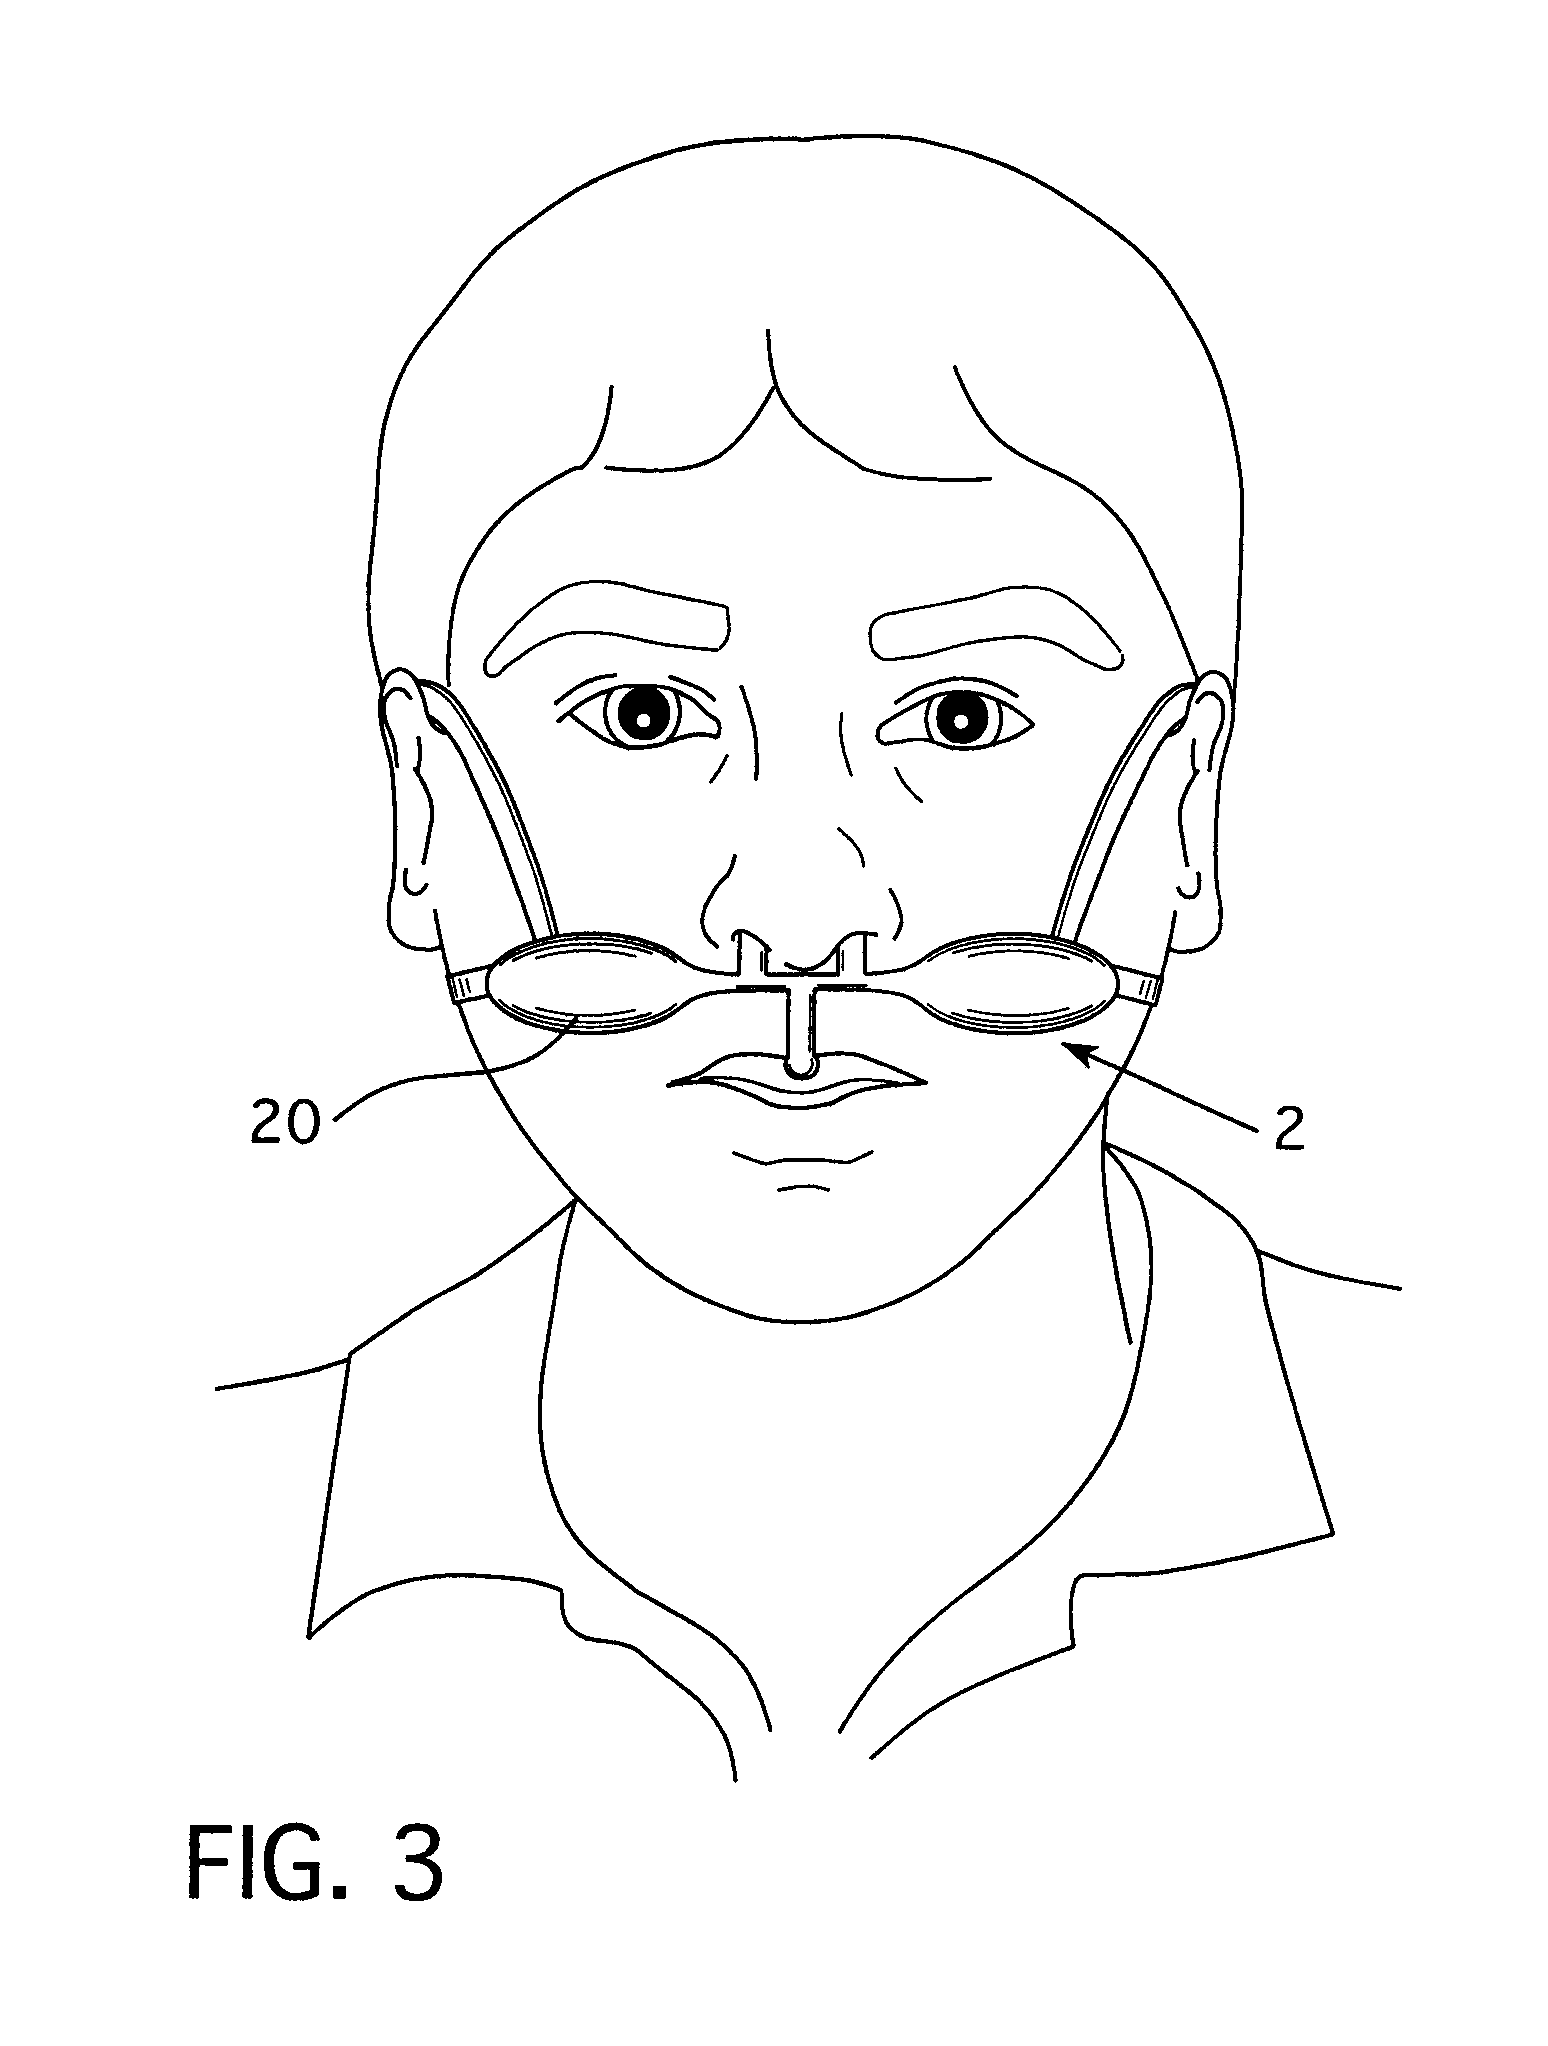 Disordered breathing monitoring device and method of using same including a study status indicator